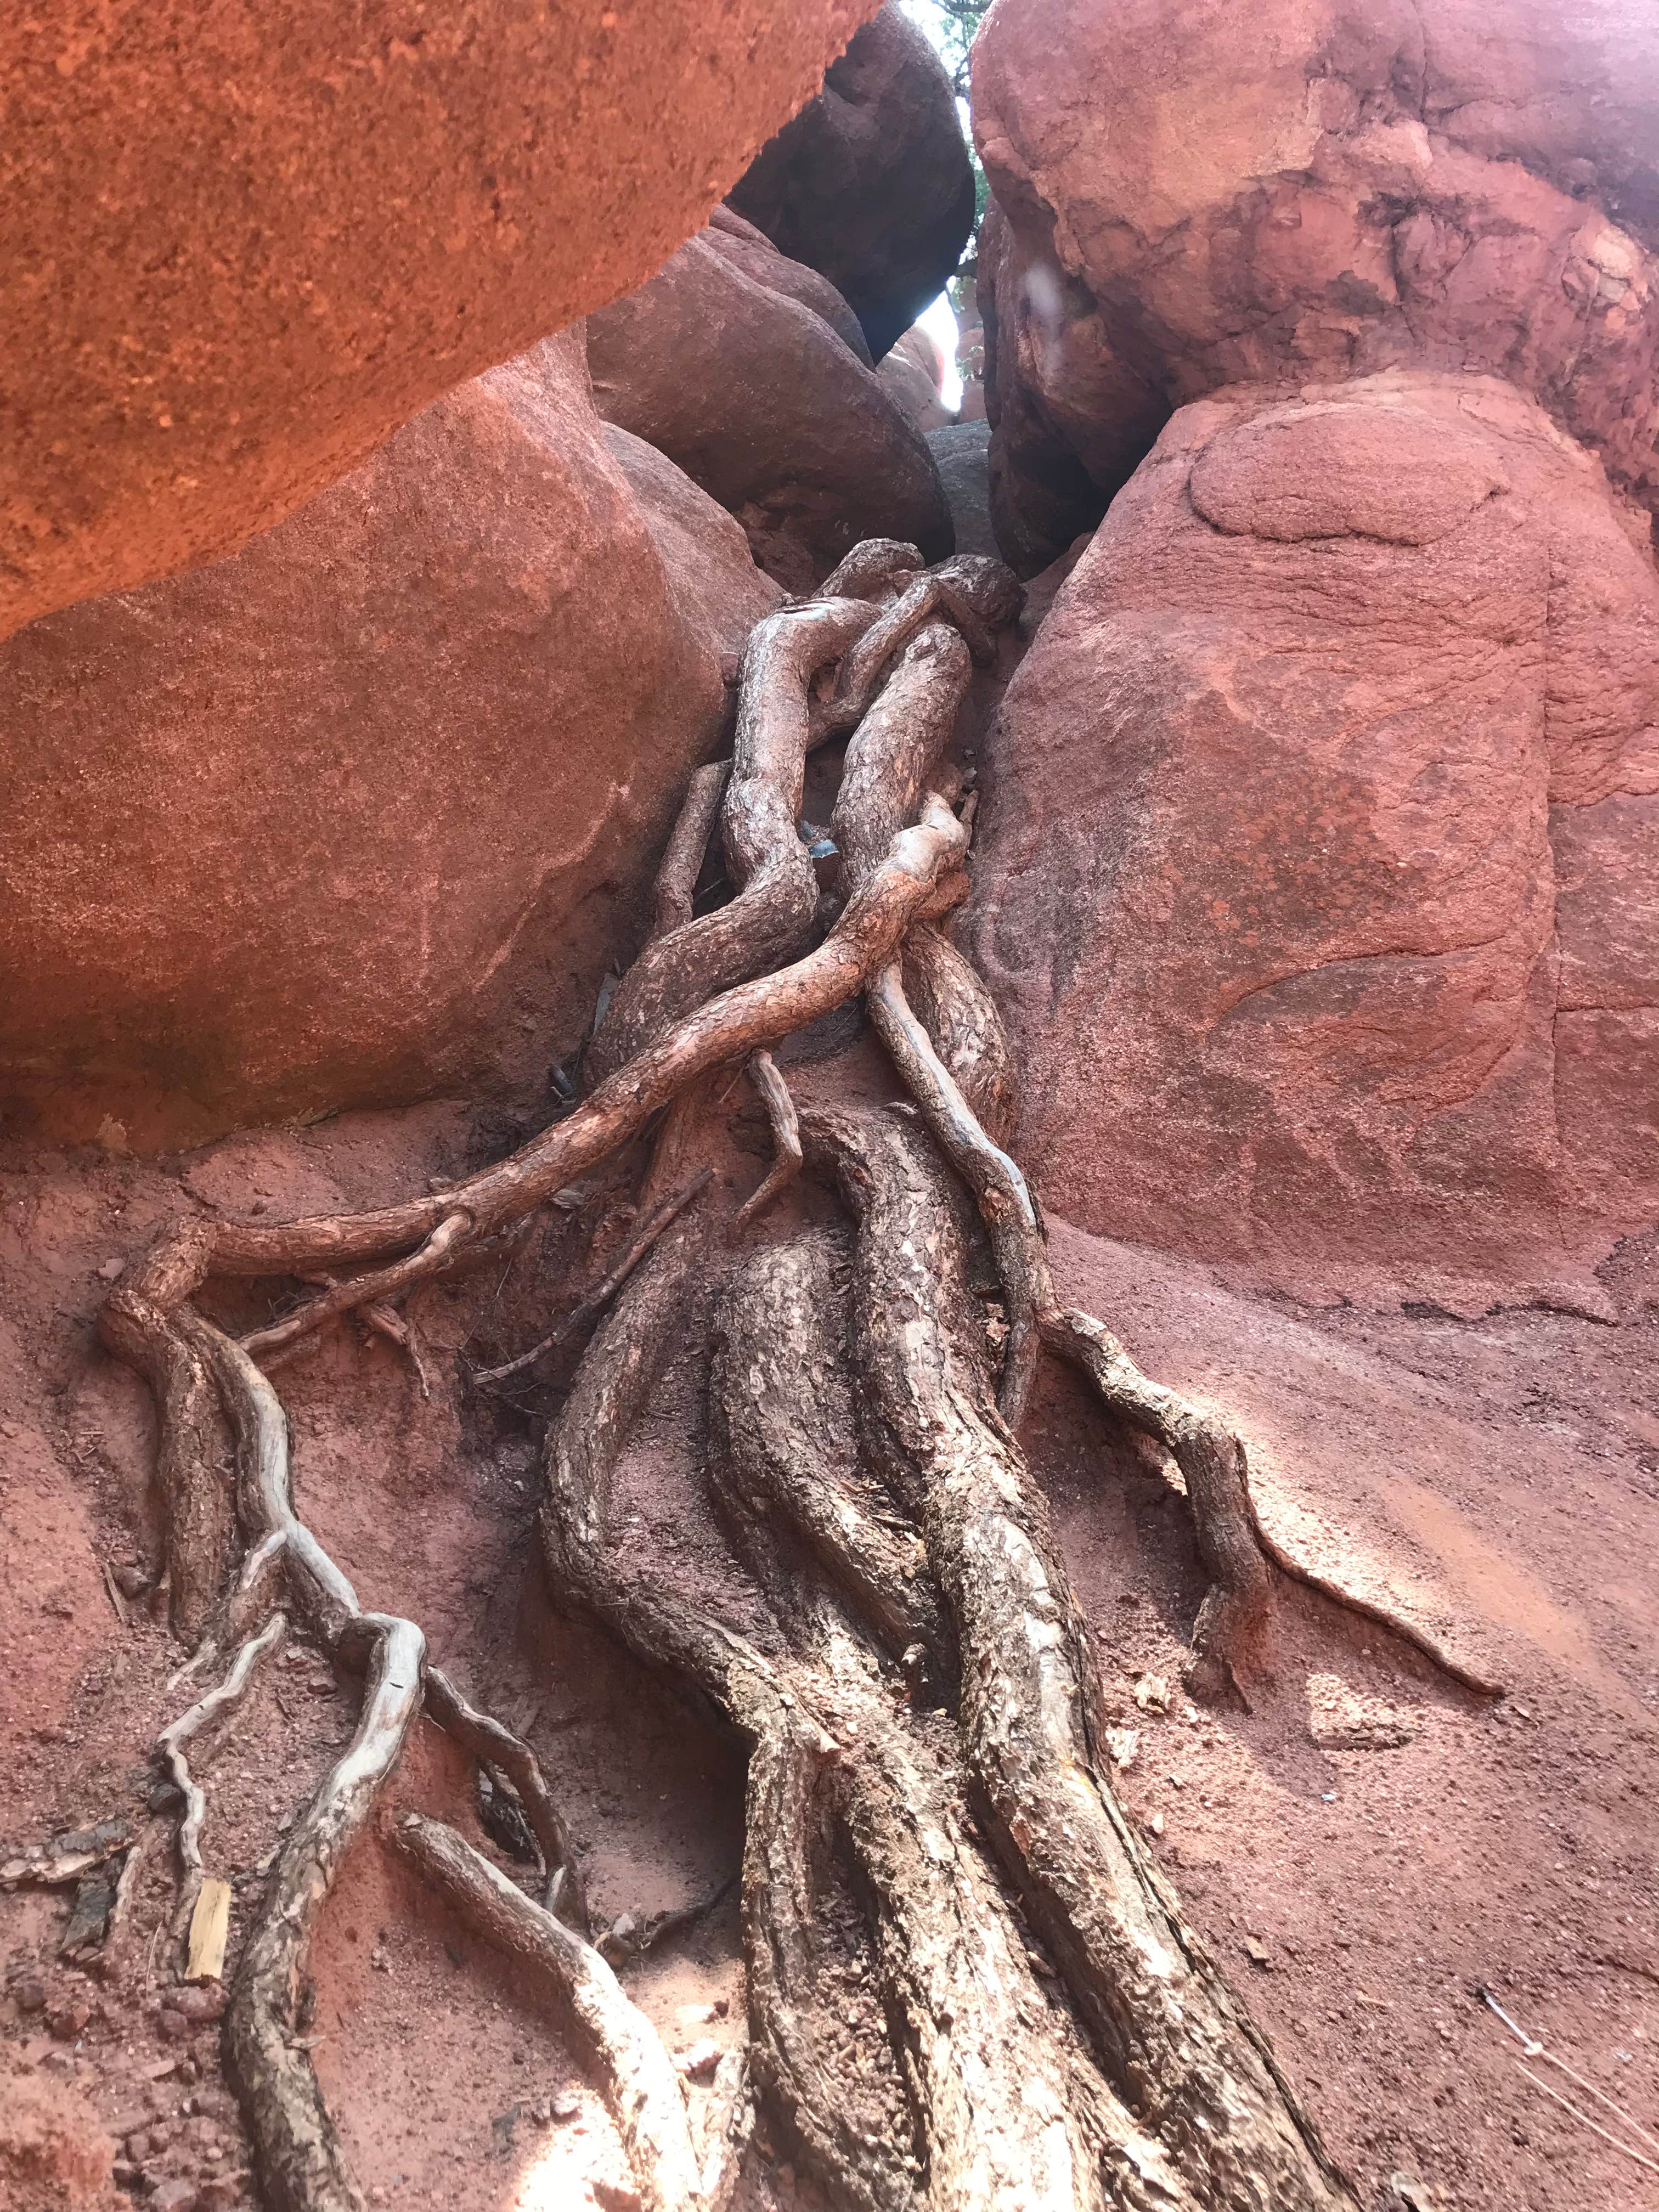 Nearby Red Rocks... trees adapt